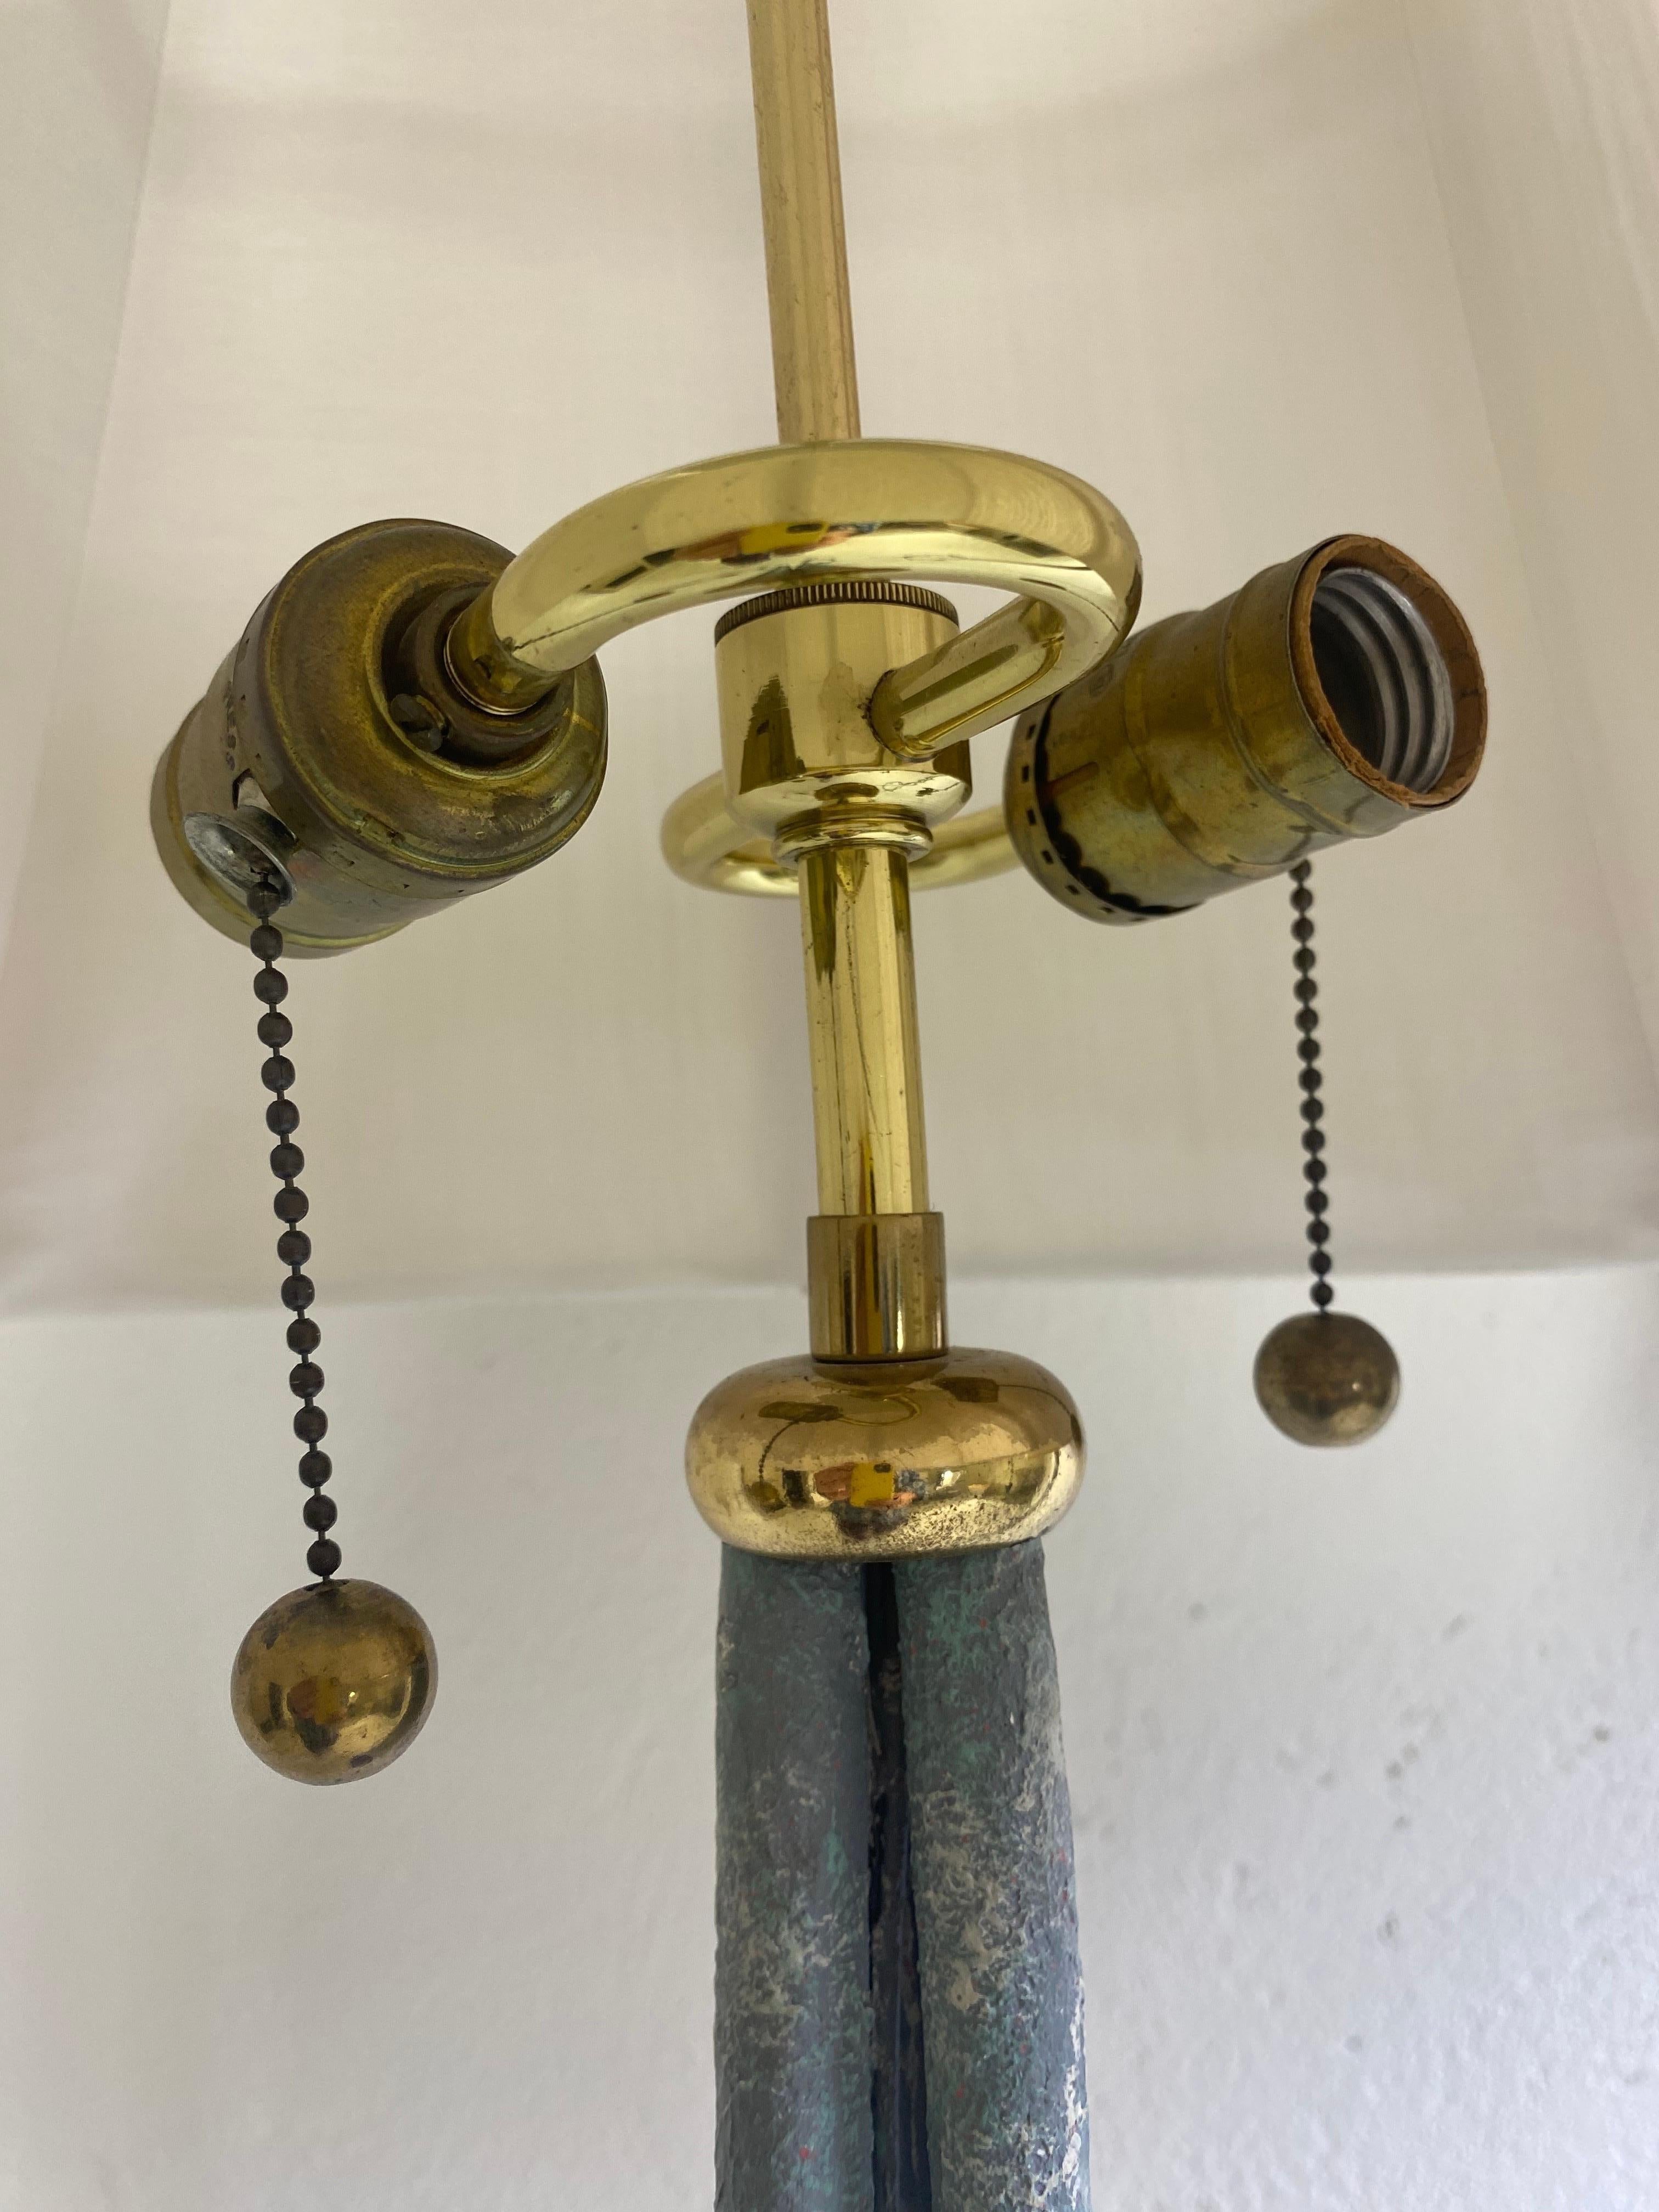 This is a pair of 20th century vintage hand wrought iron floor lamps. This pair of floor lamps are topped with solid brass S cluster sockets and fittings mounted at the top. The iron bases have a distressed oxidized finish to the surface and have a